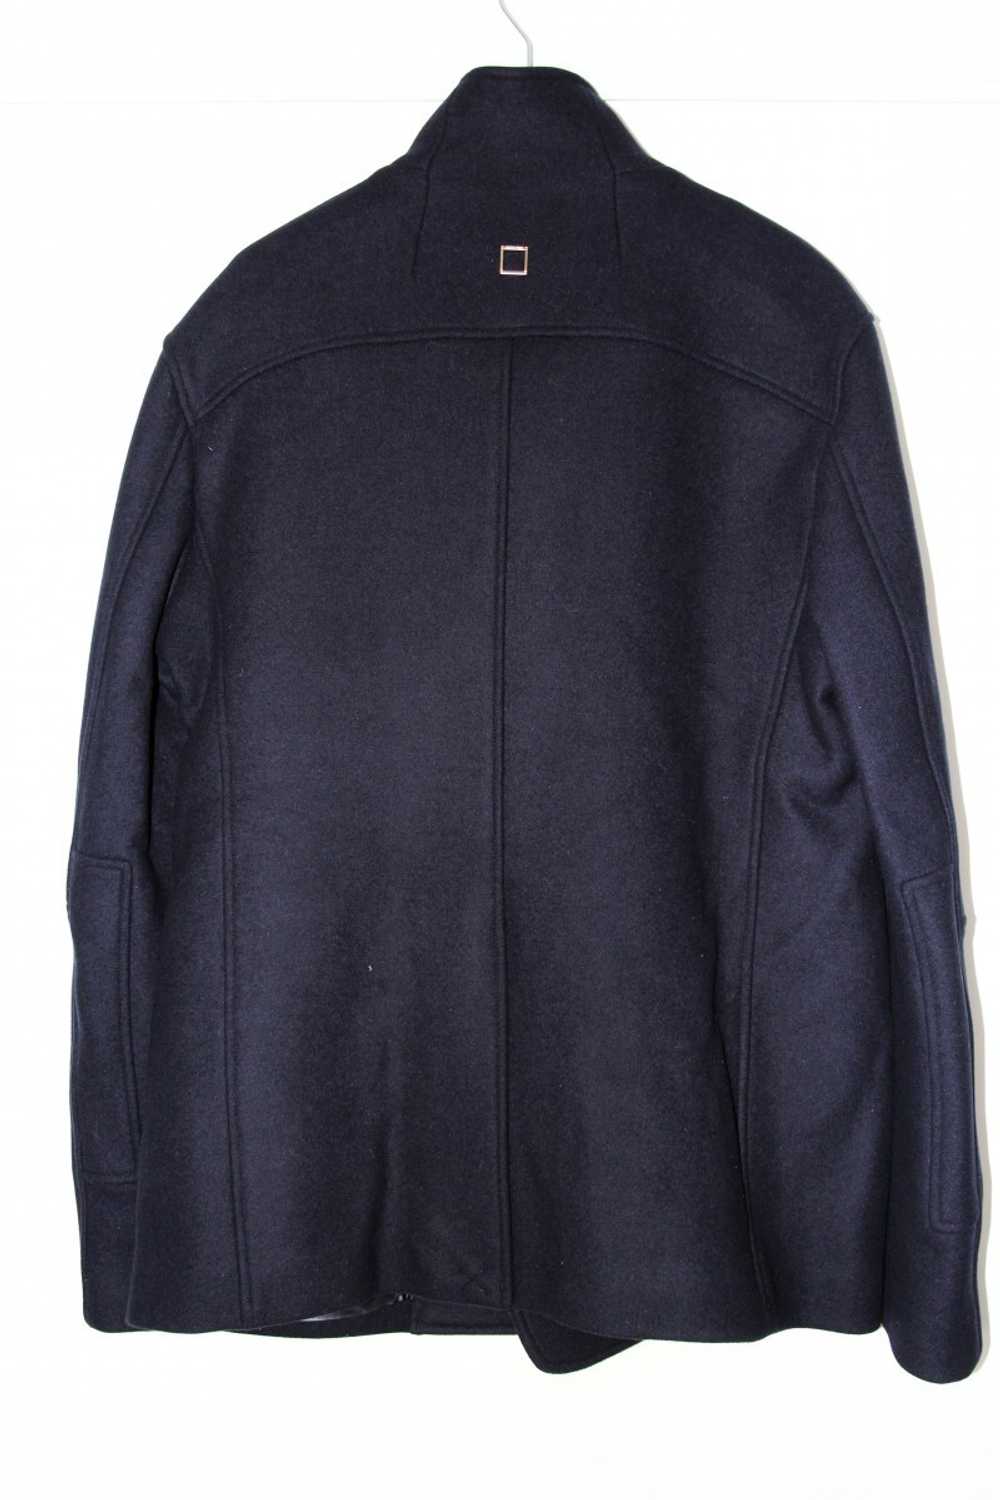 BNWT AW20 WOOYOUNGMI CLASSIC DOUBLE-BREASTED COAT… - image 3